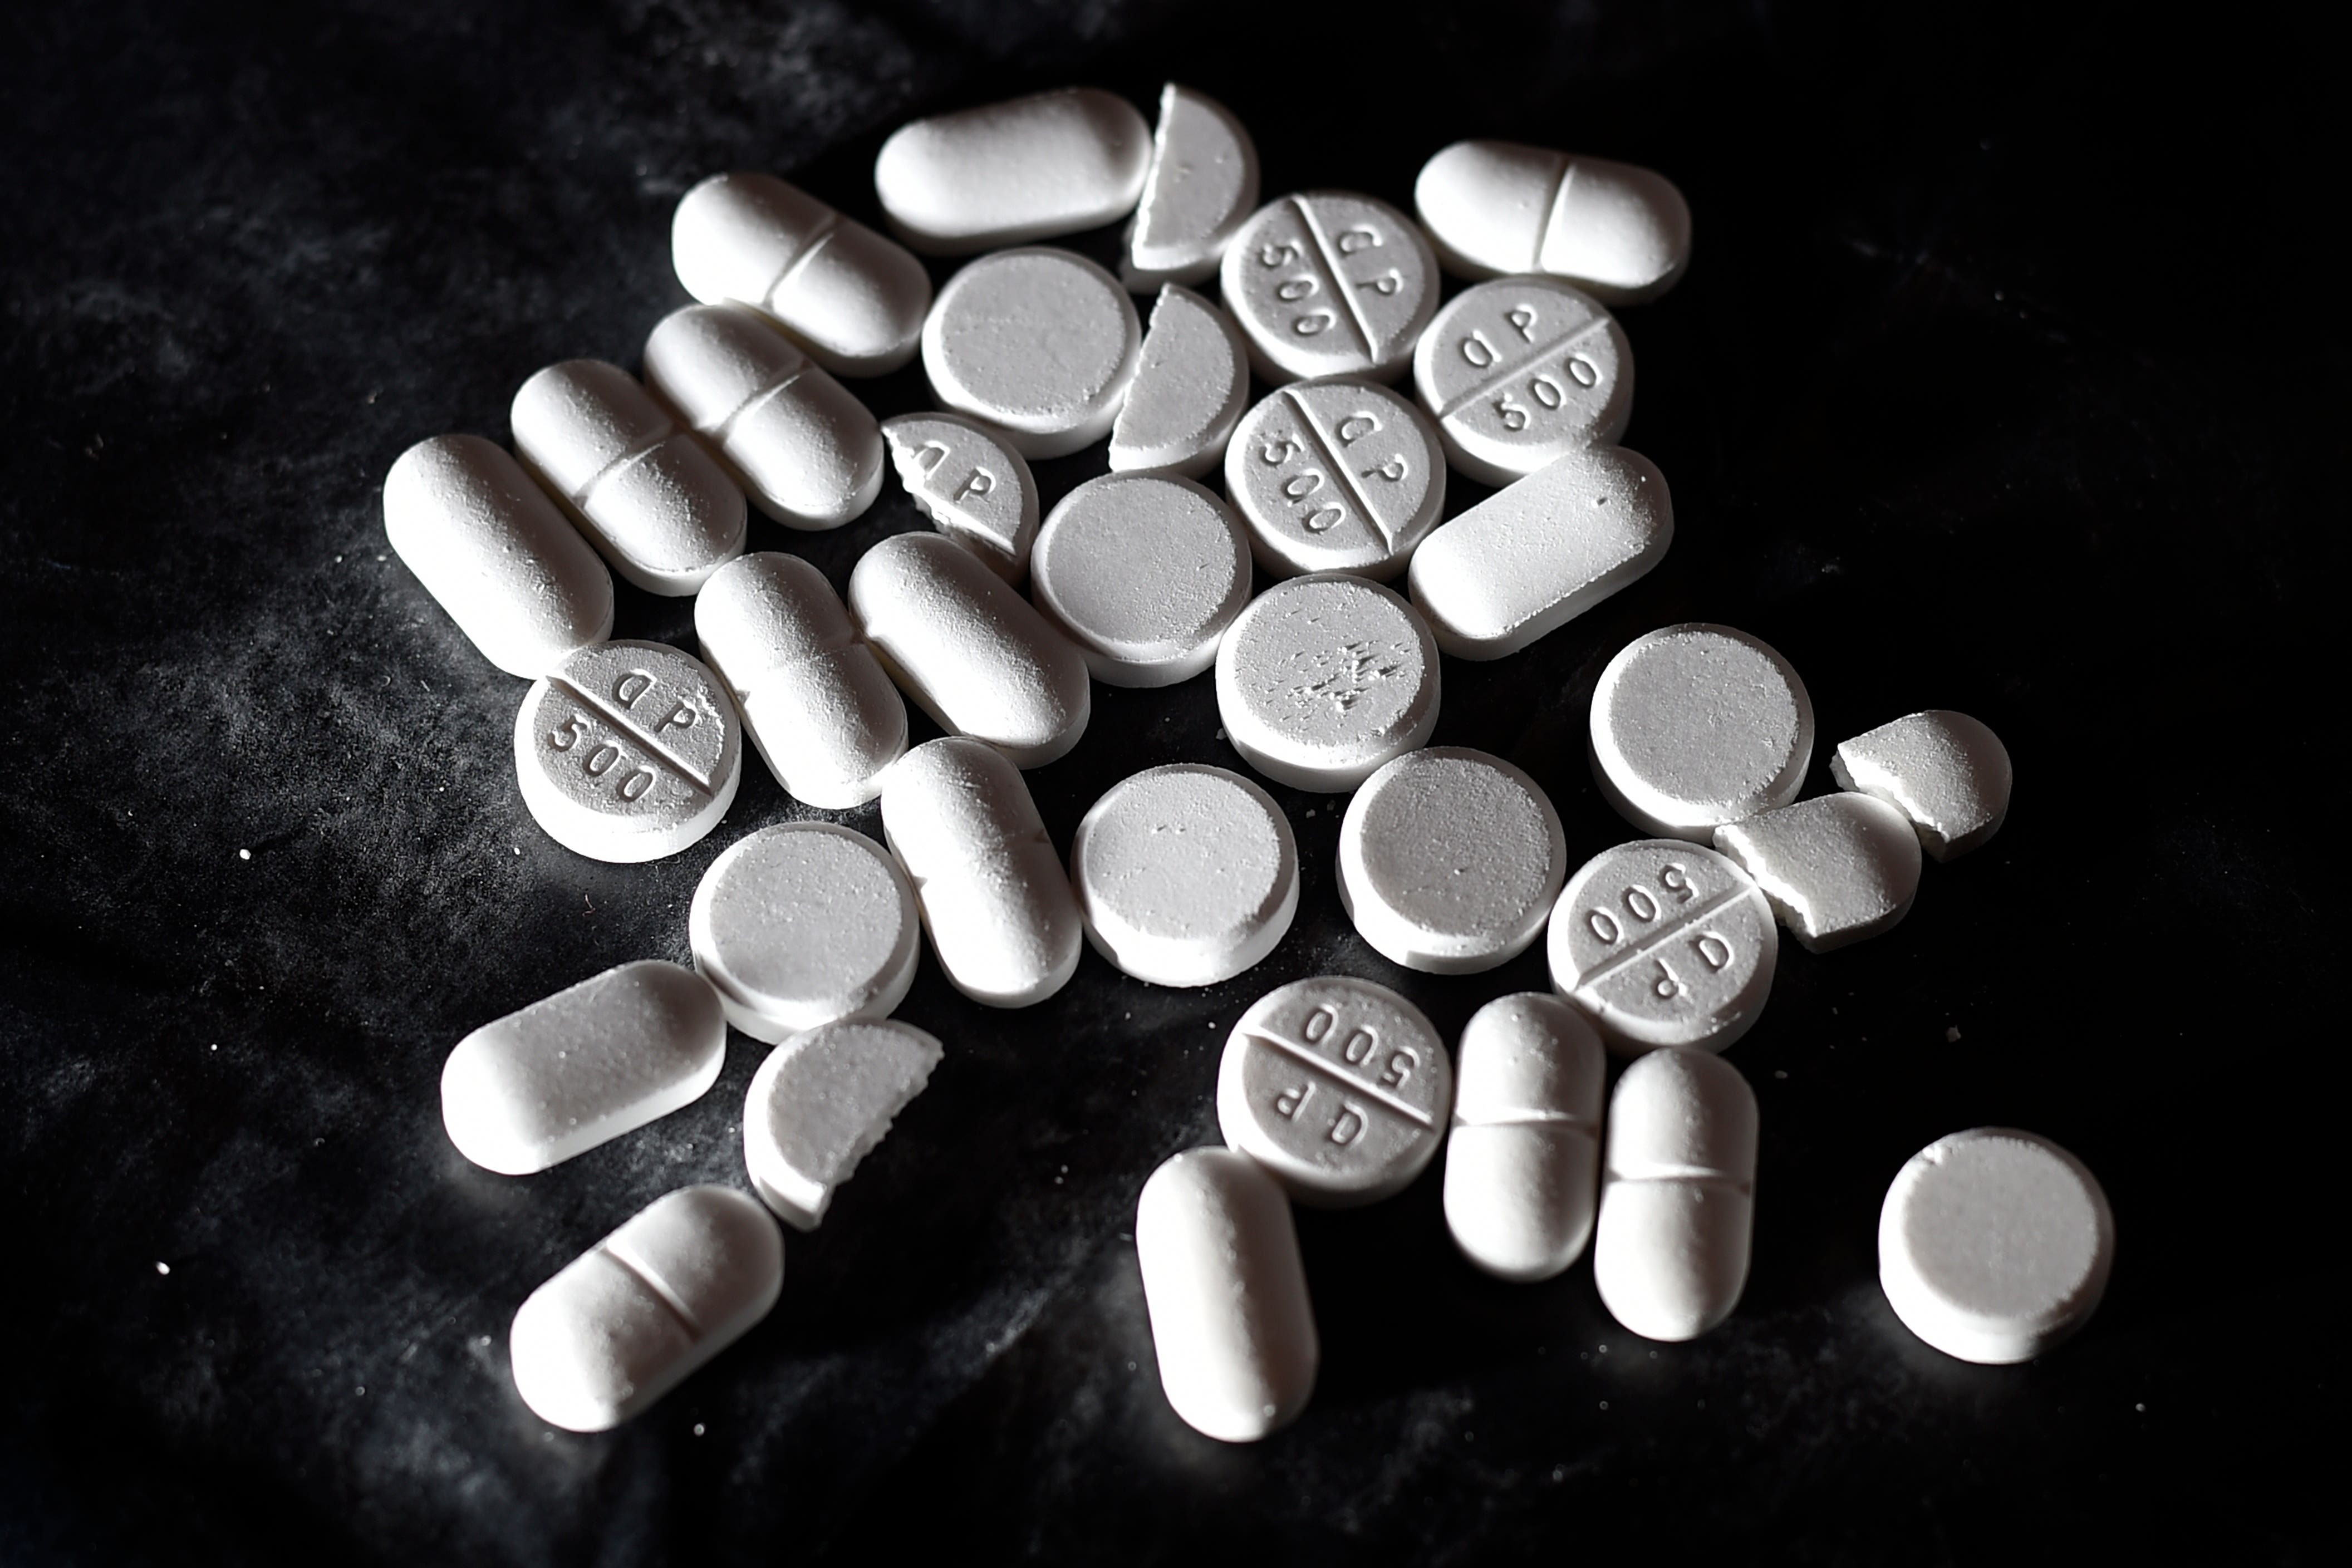 Opioids such as morphine, fentanyl and codeine are super strength medications for pain which can be highly addictive (Lauren Hurley/PA)